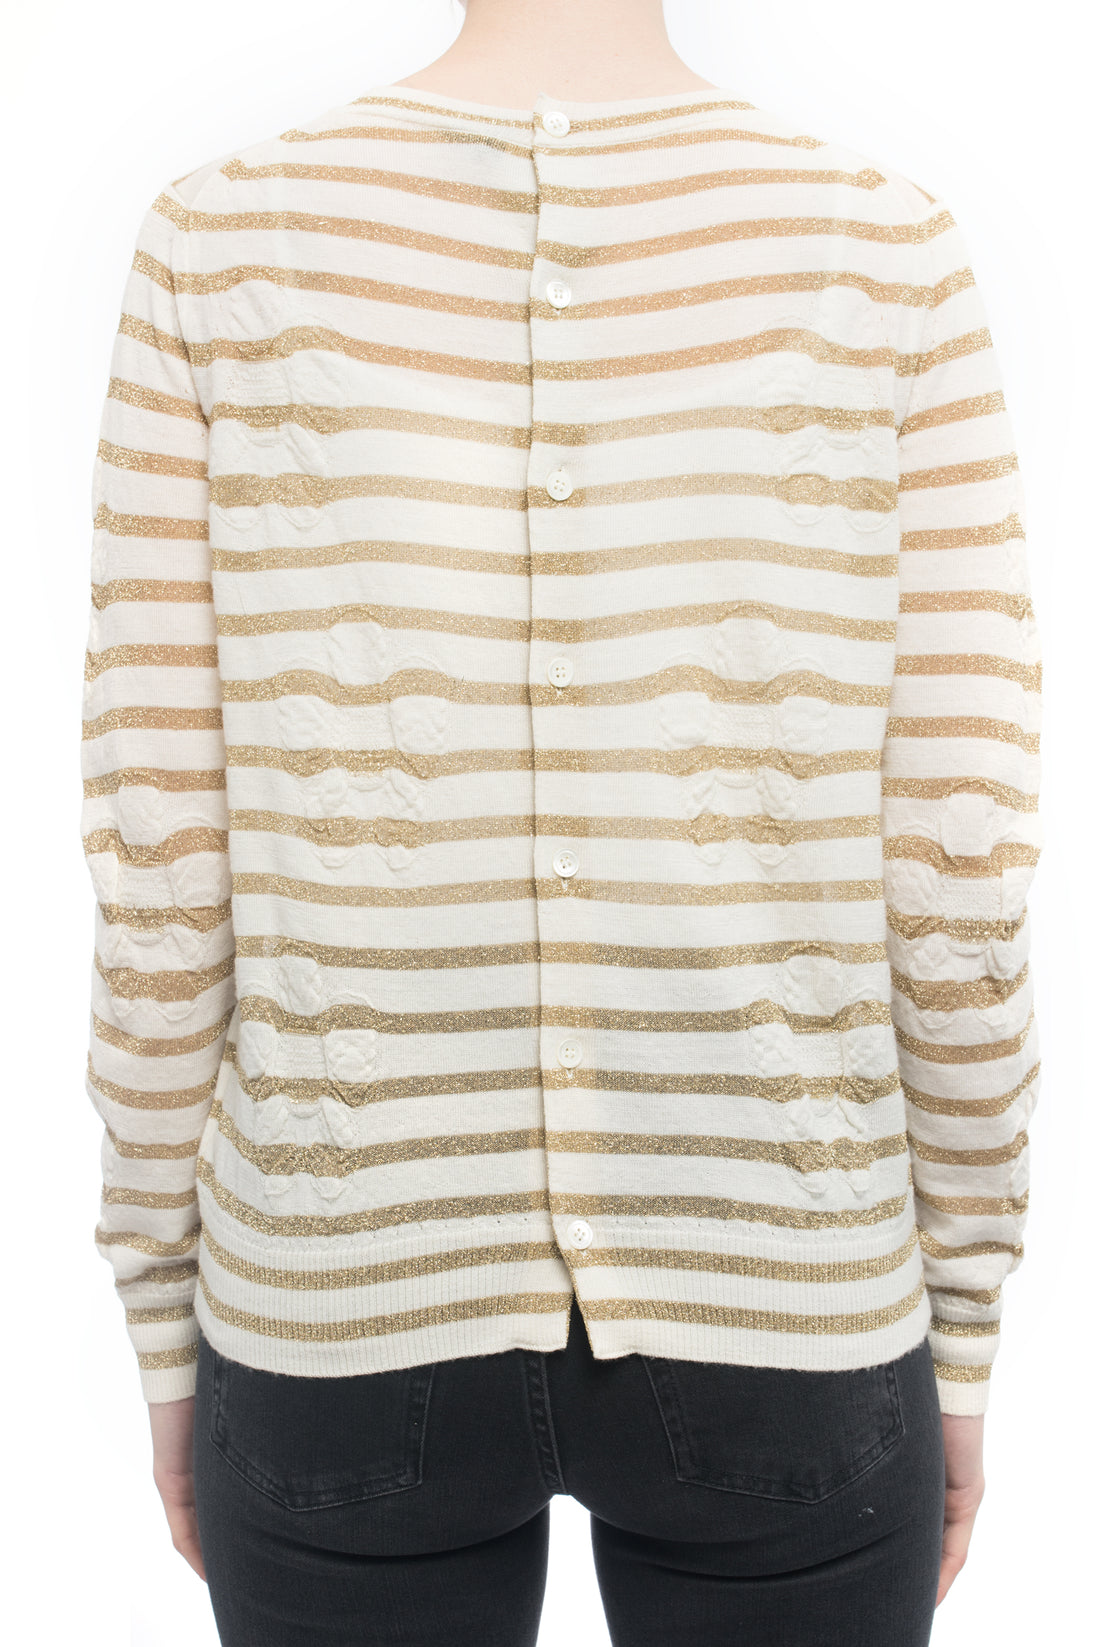 Tricot Comme des Garcons Gold and Ivory Striped Sweater Top - S